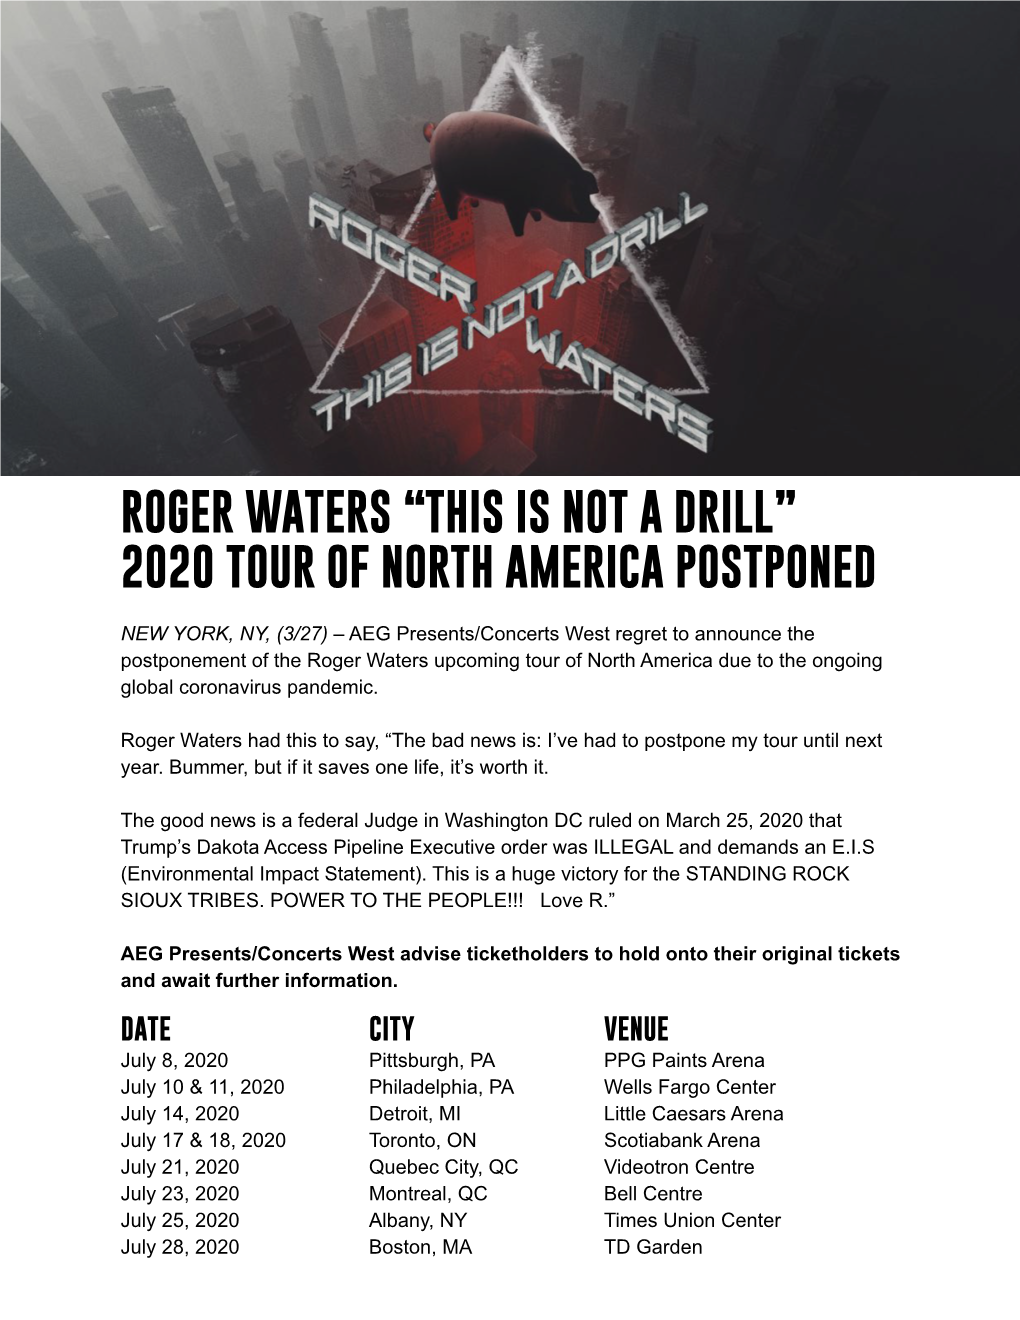 Roger Waters “This Is Not a Drill” 2020 Tour of North America Postponed